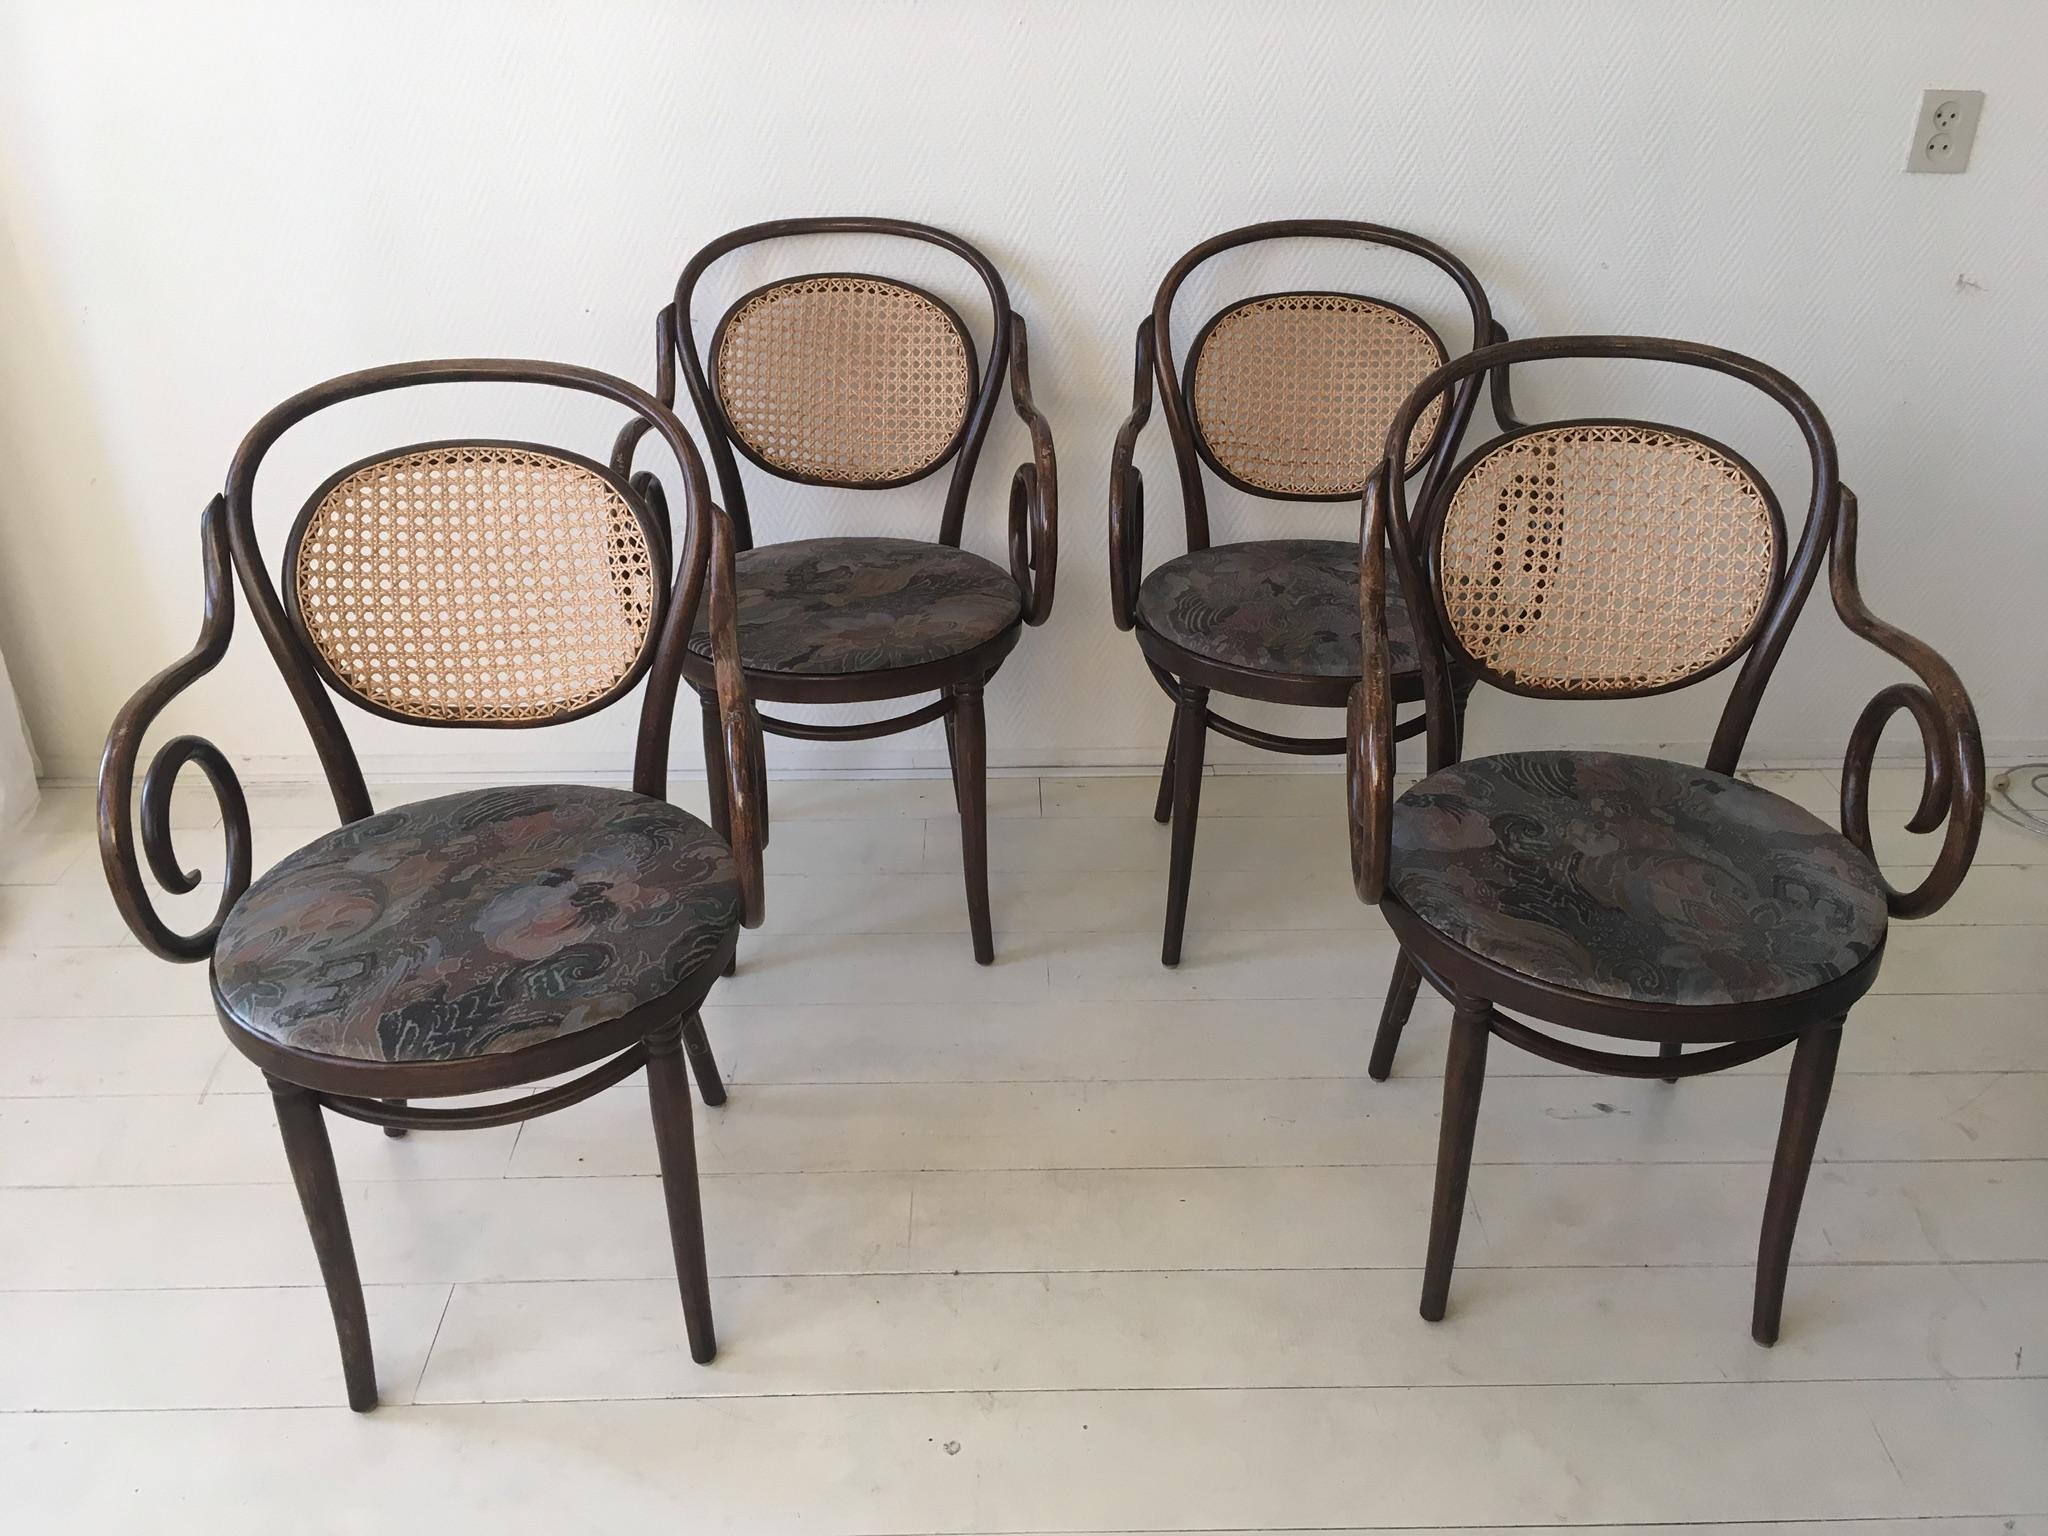 ZPM Radomsko, Former Thonet, No. 11 Bentwood and Rattan Dining Room Chairs 6